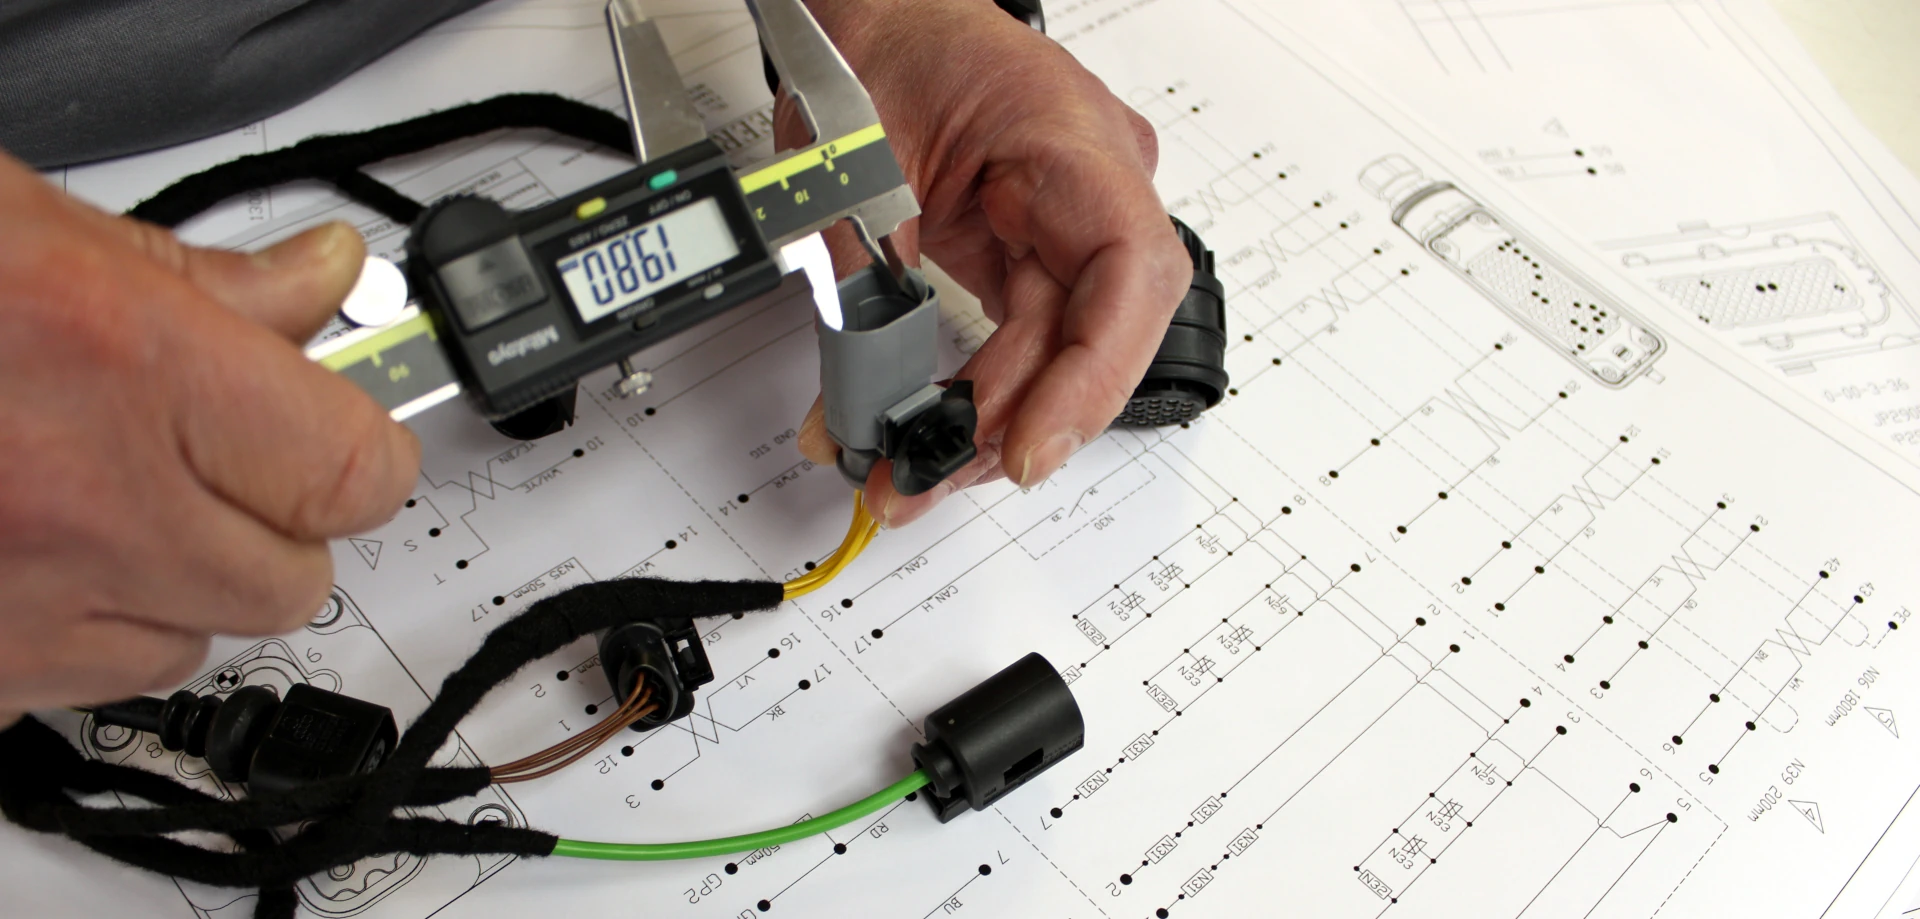 Grey connector being measured with calipers on a schematic background